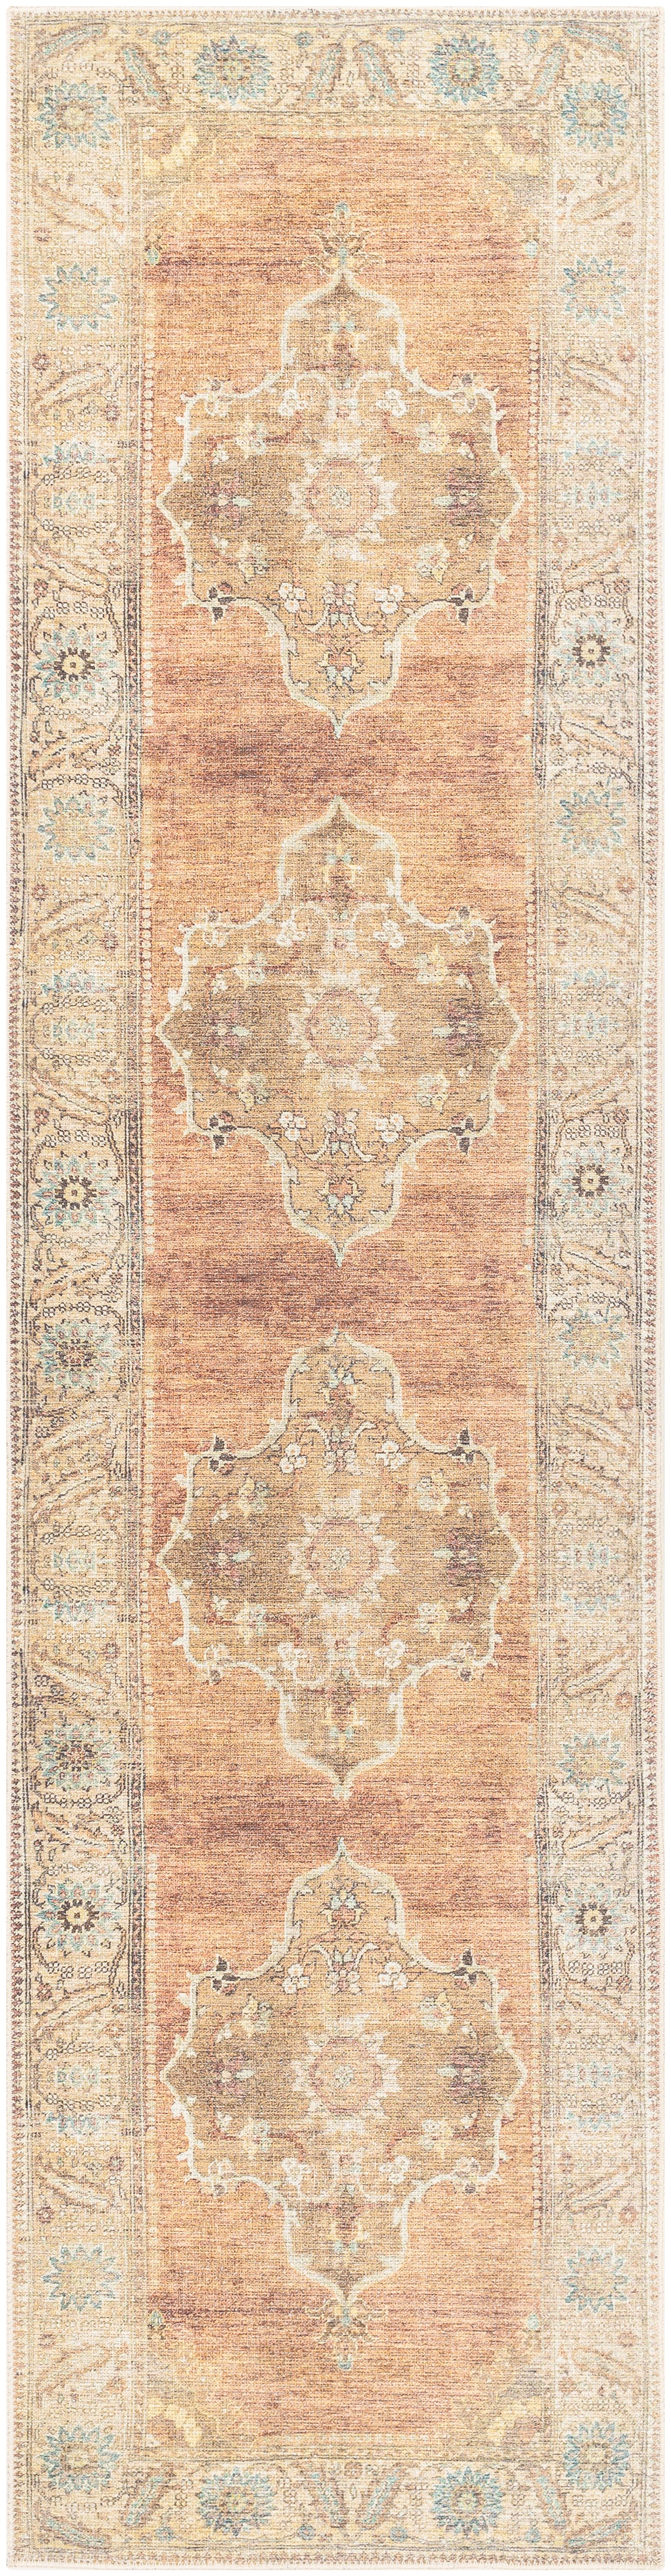 Antiquity 25200 Machine Woven Synthetic Blend Indoor Area Rug by Surya Rugs